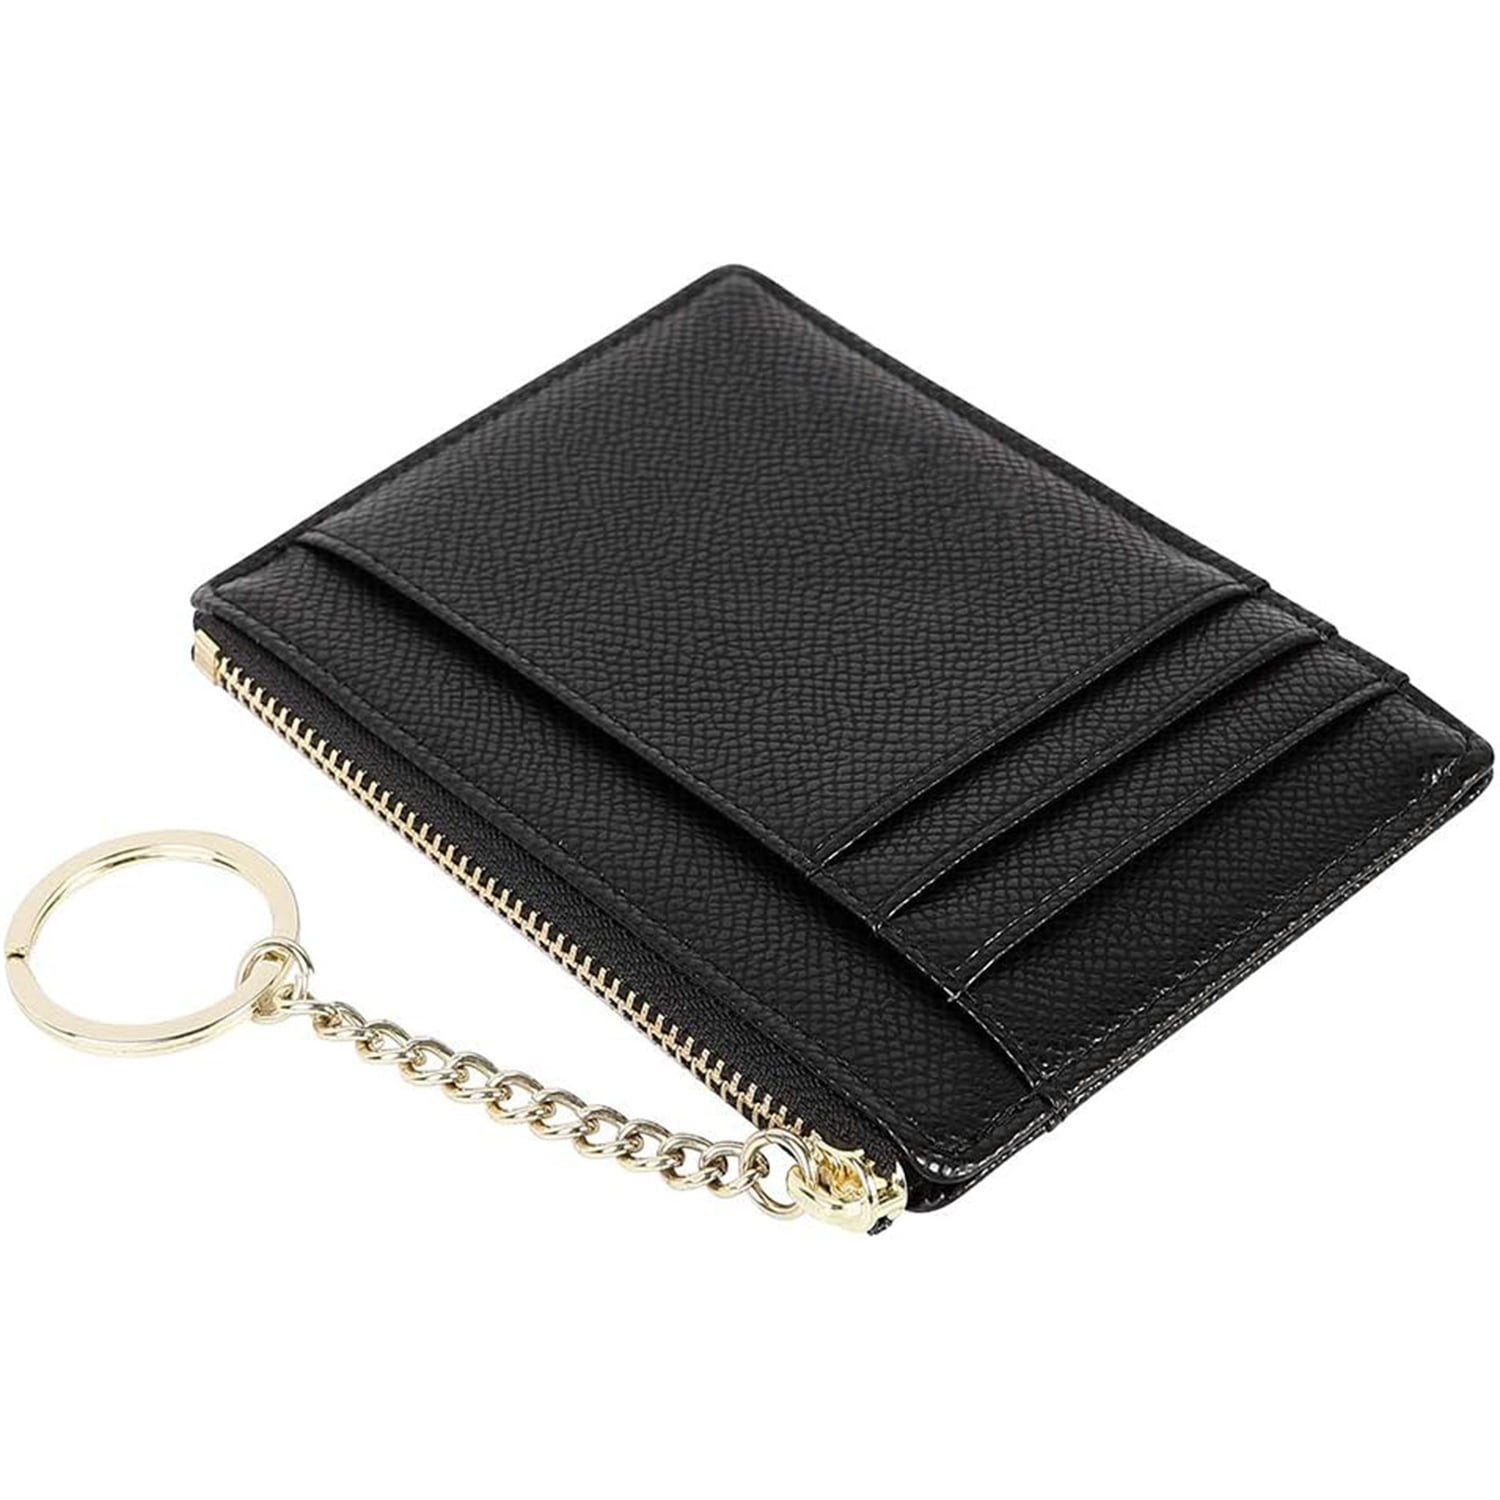 Wallet purse 'Chloe' leather black for ladies - Corf Bags Leatherbags